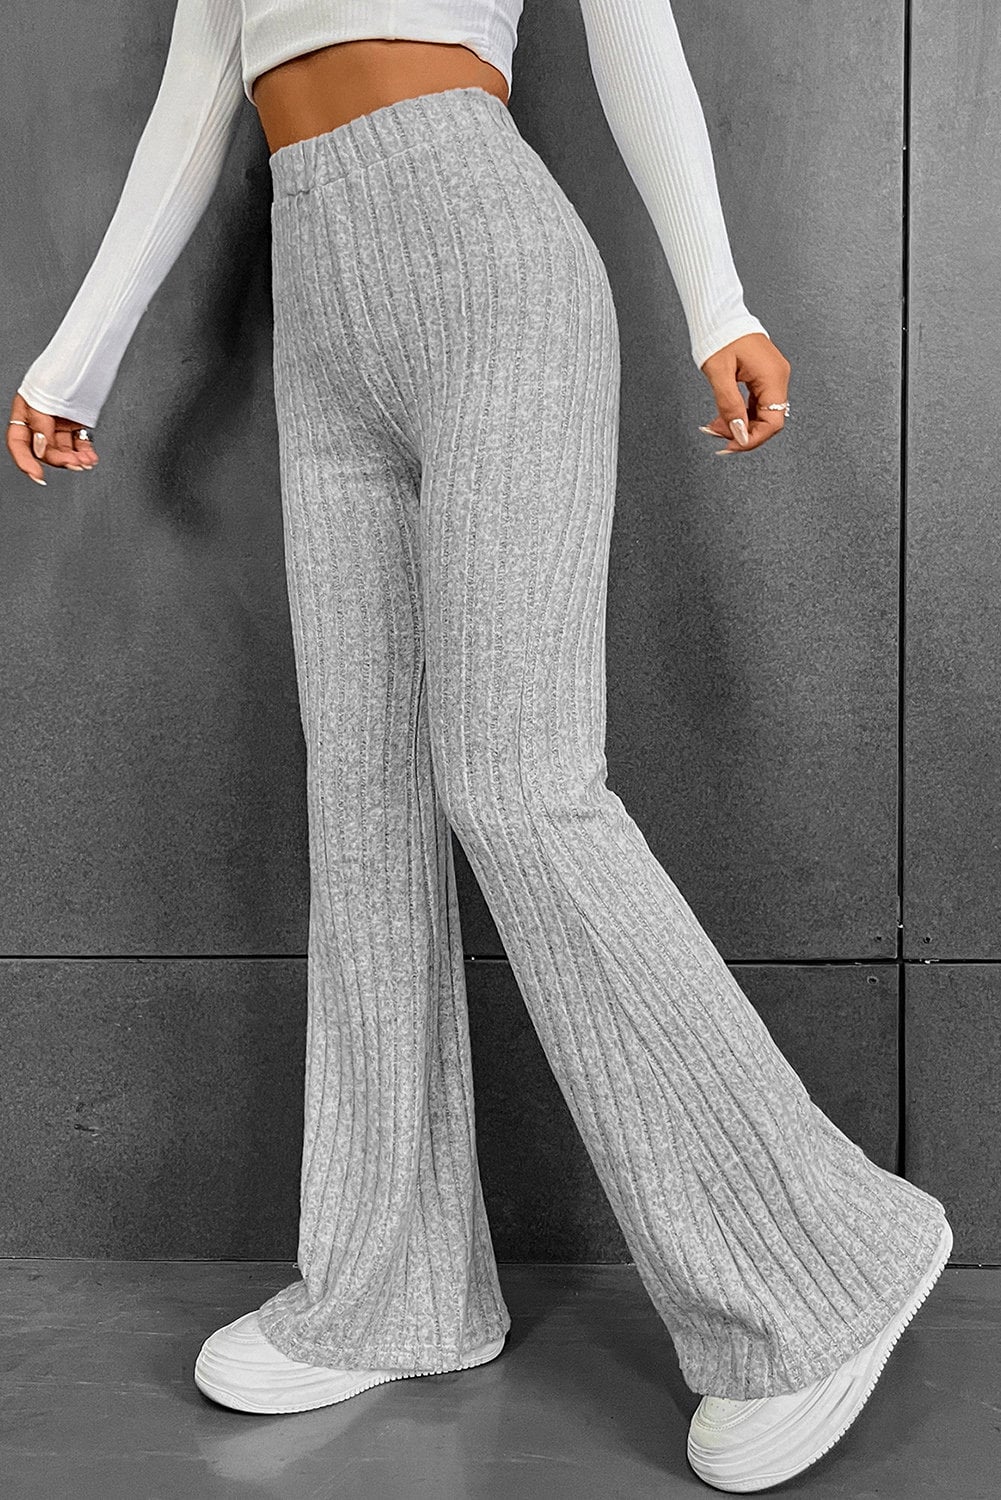 Rib High Waist Flare Pant made by stretchable ribbed cotton fabric